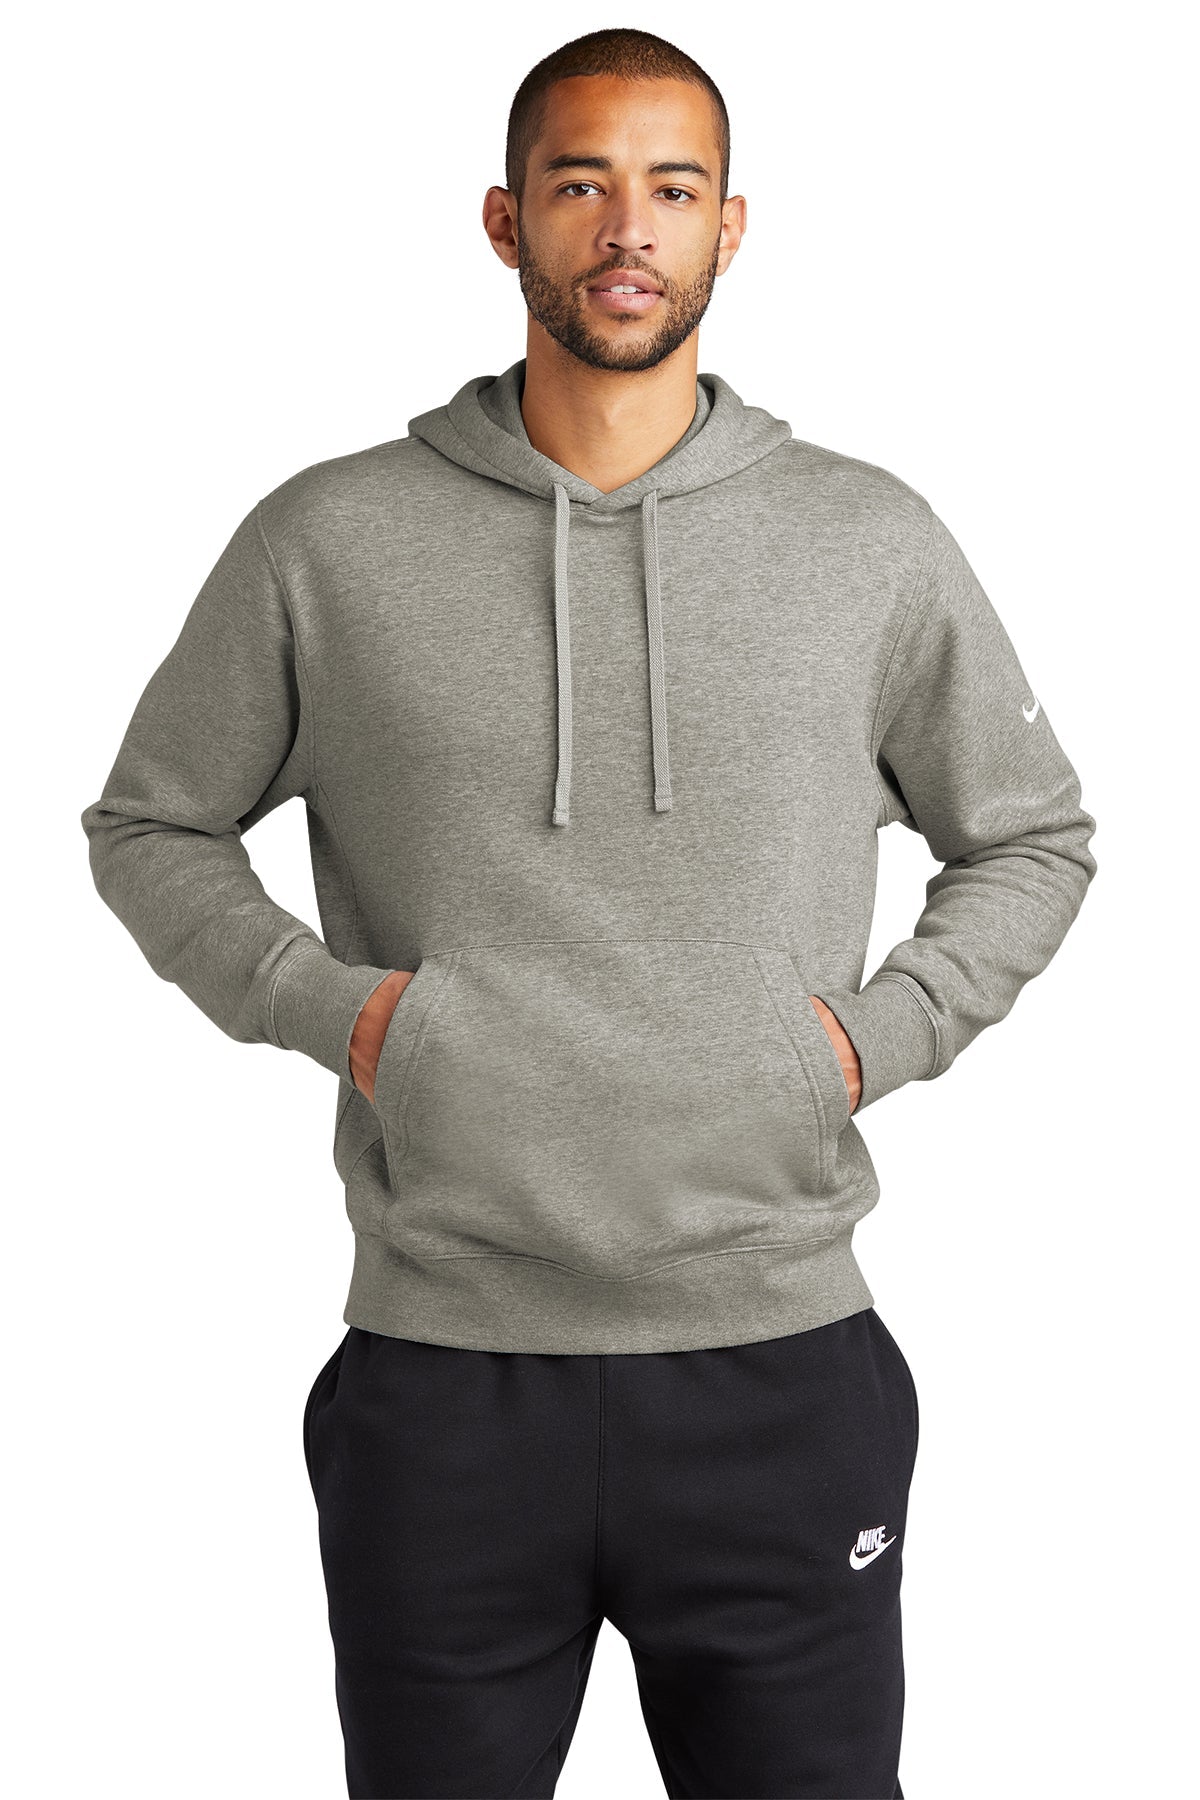 Nike Men's Sportswear Club All Over Print Pullover Hoodie, Black, Size: Small, Fleece/Polyester/Cotton